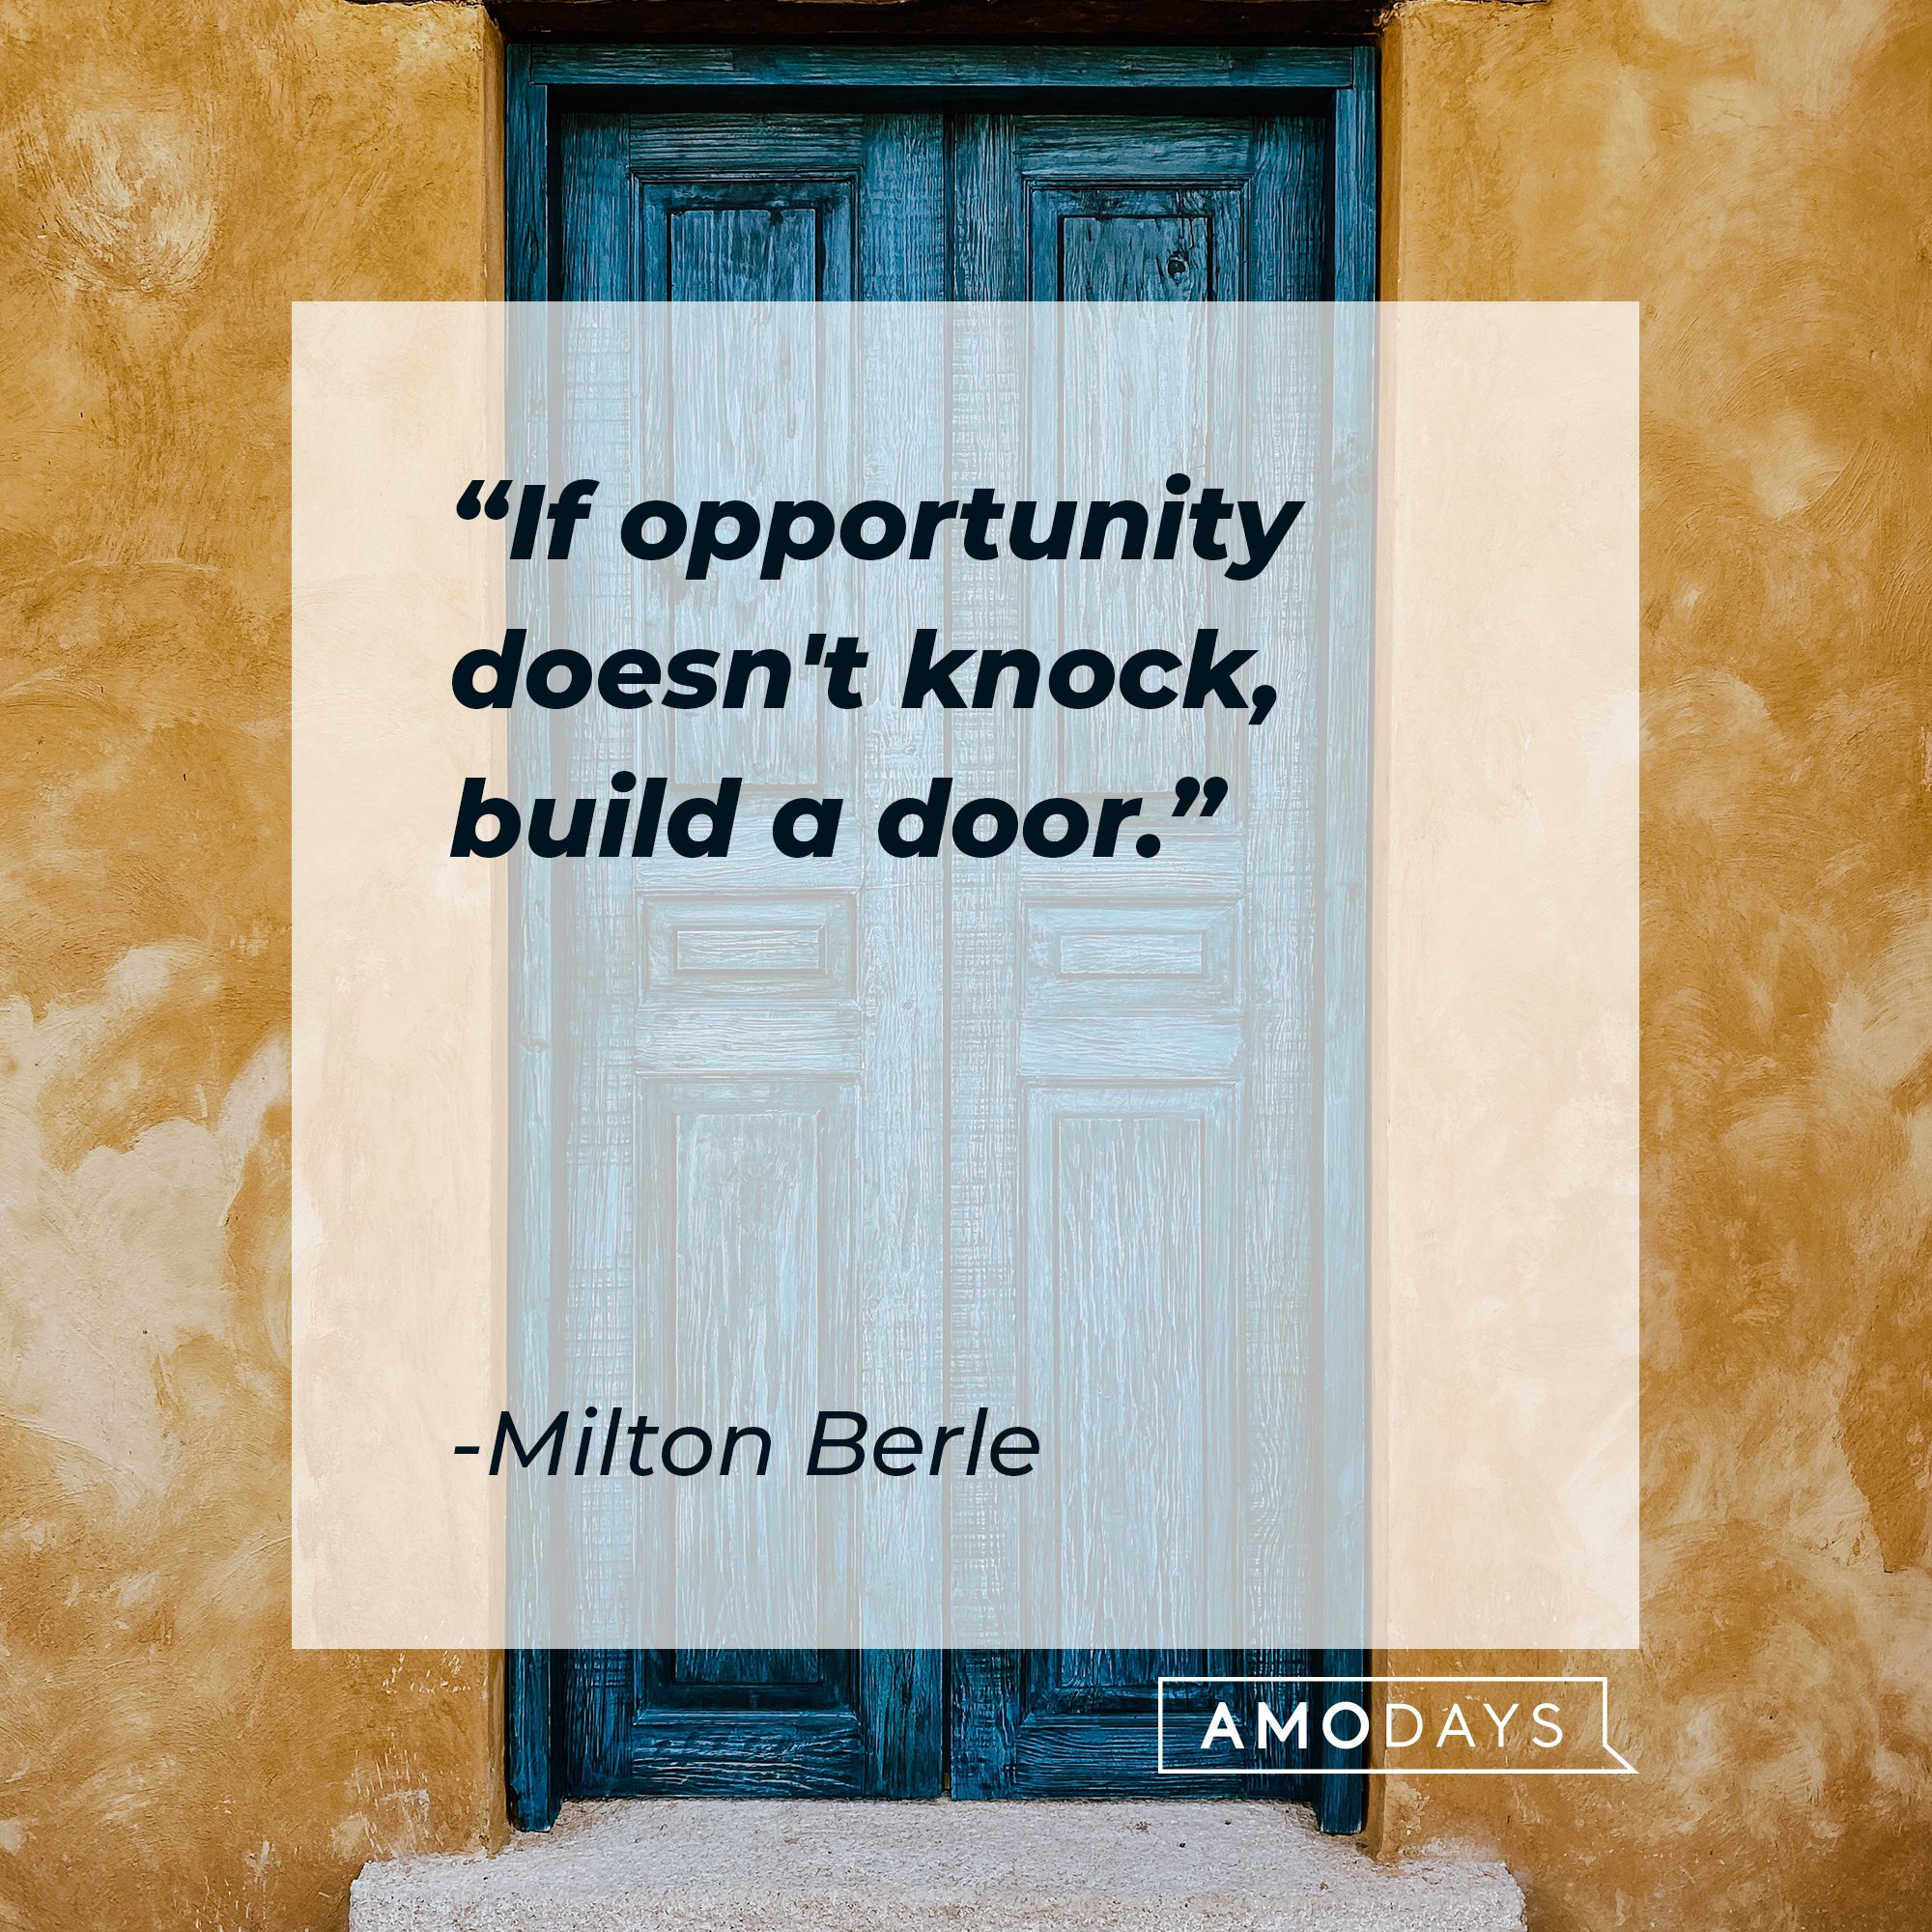 Milton Berle’s quote: "If opportunity doesn't knock, build a door.” | Image: AmoDays 